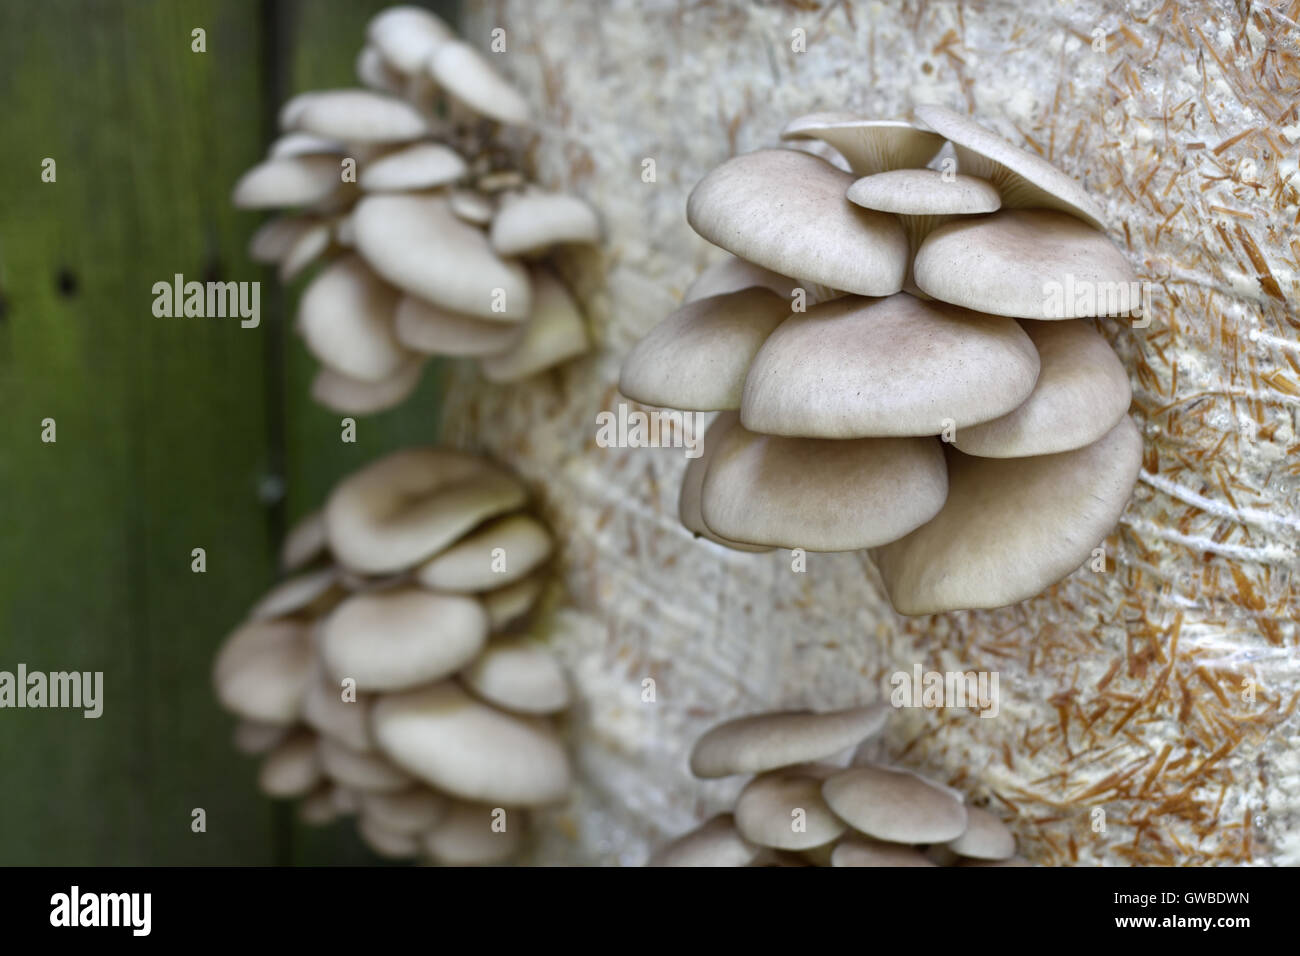 Oyster Mushrums (Pleurotus ostreatus) cultivated on straw. Growing Mushrooms at Home. Close up, selective focus. Stock Photo